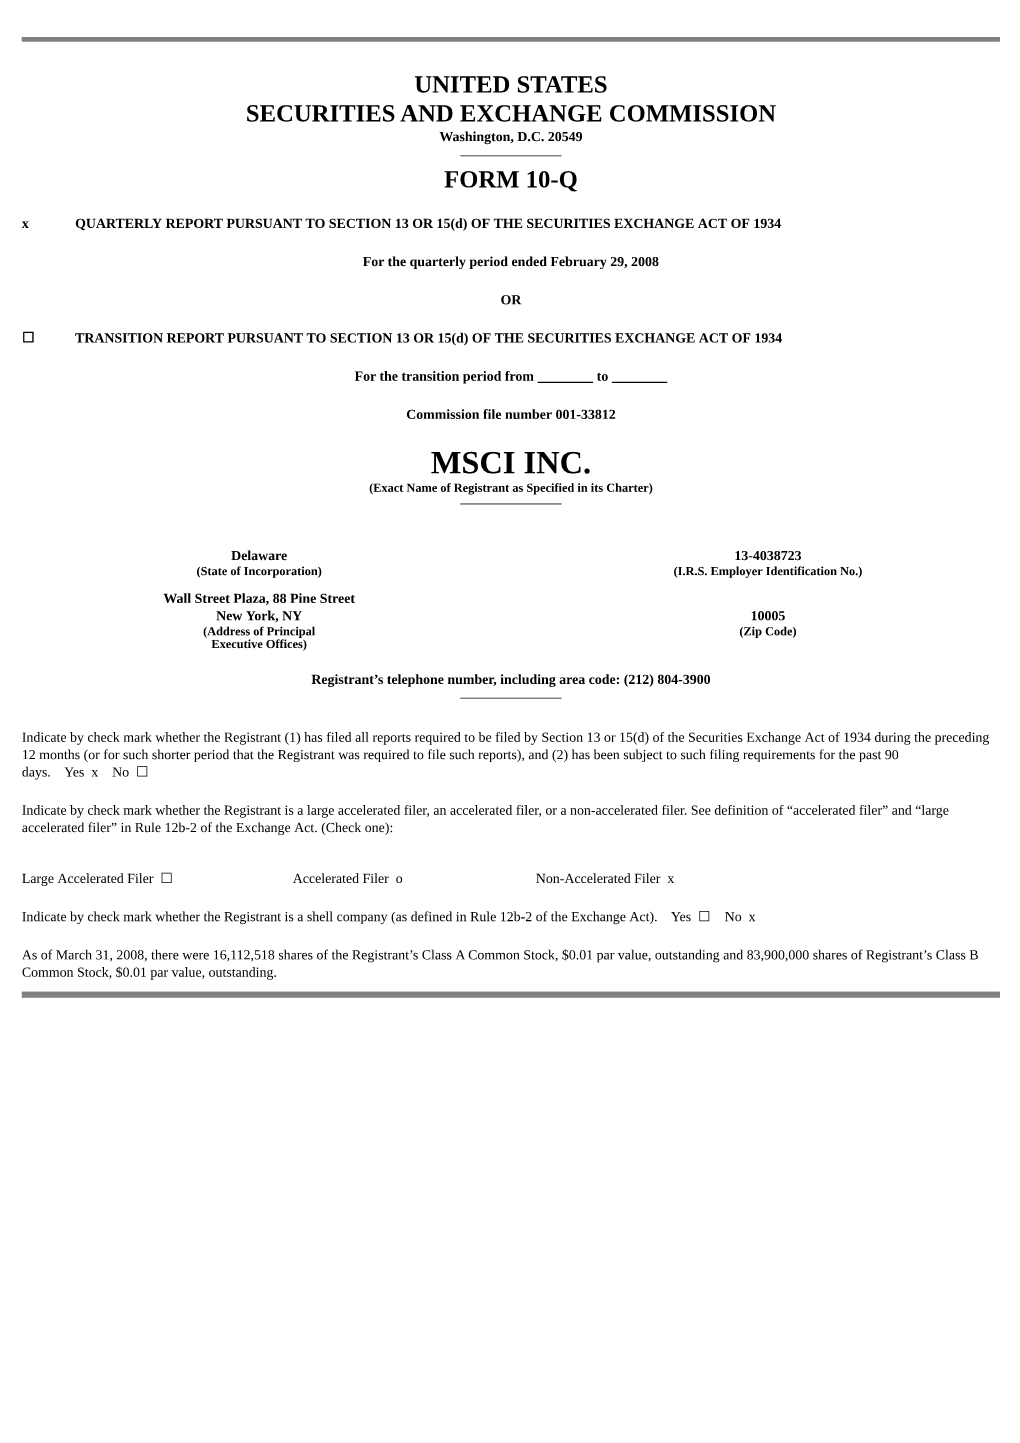 MSCI INC. (Exact Name of Registrant As Specified in Its Charter)